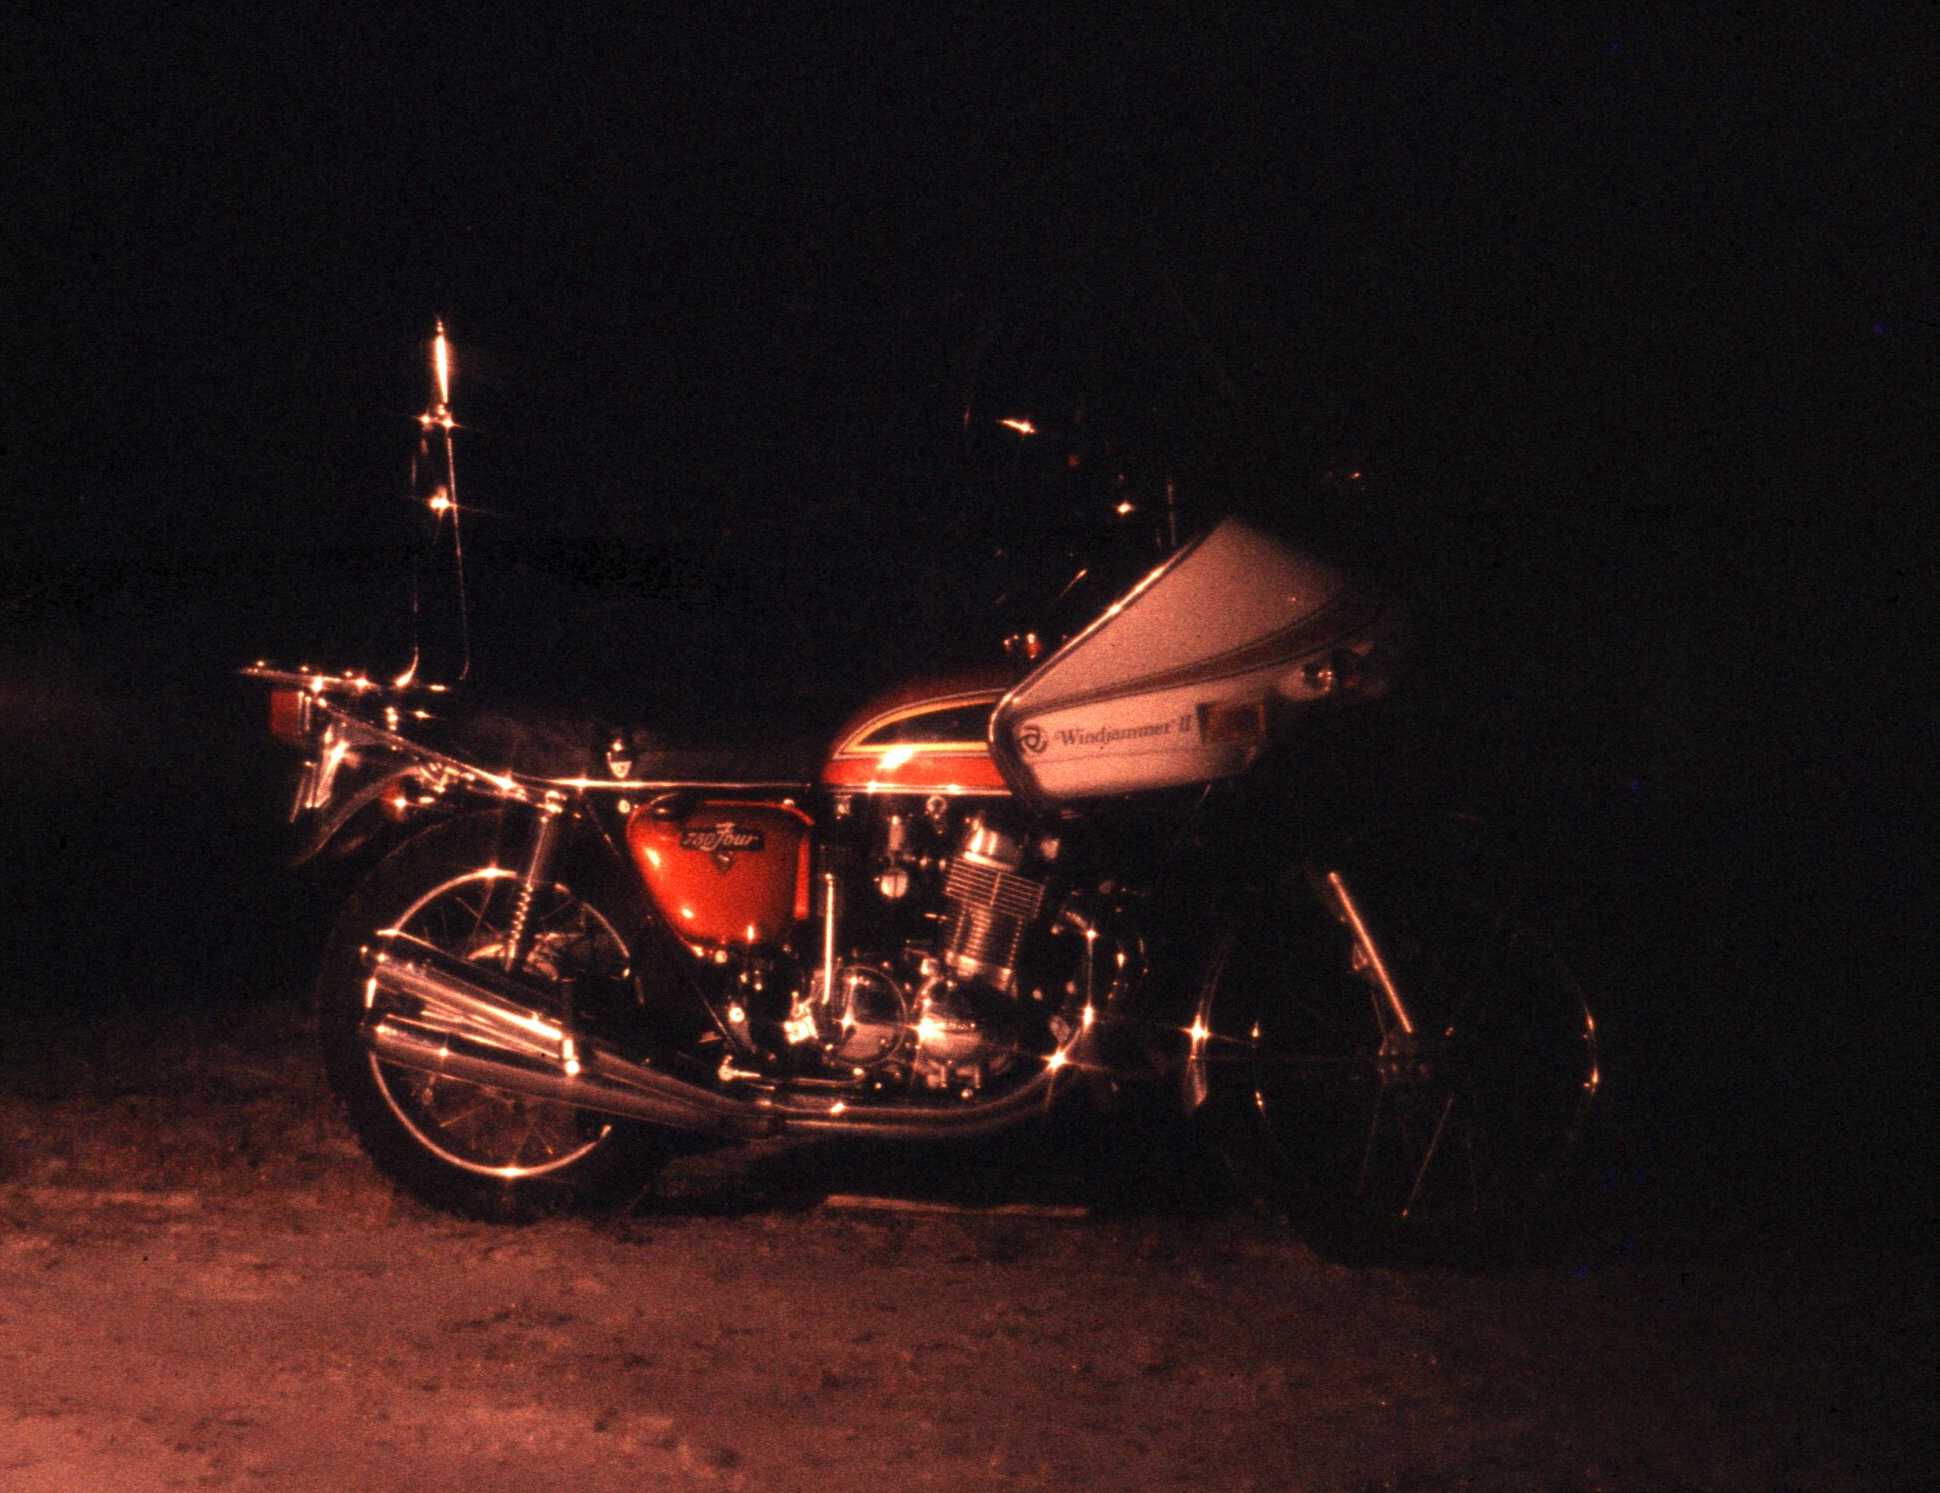 My 1974 CB750 Honda K4 bought at Huntington Honda, Tennessee, the very night that I brought it home.